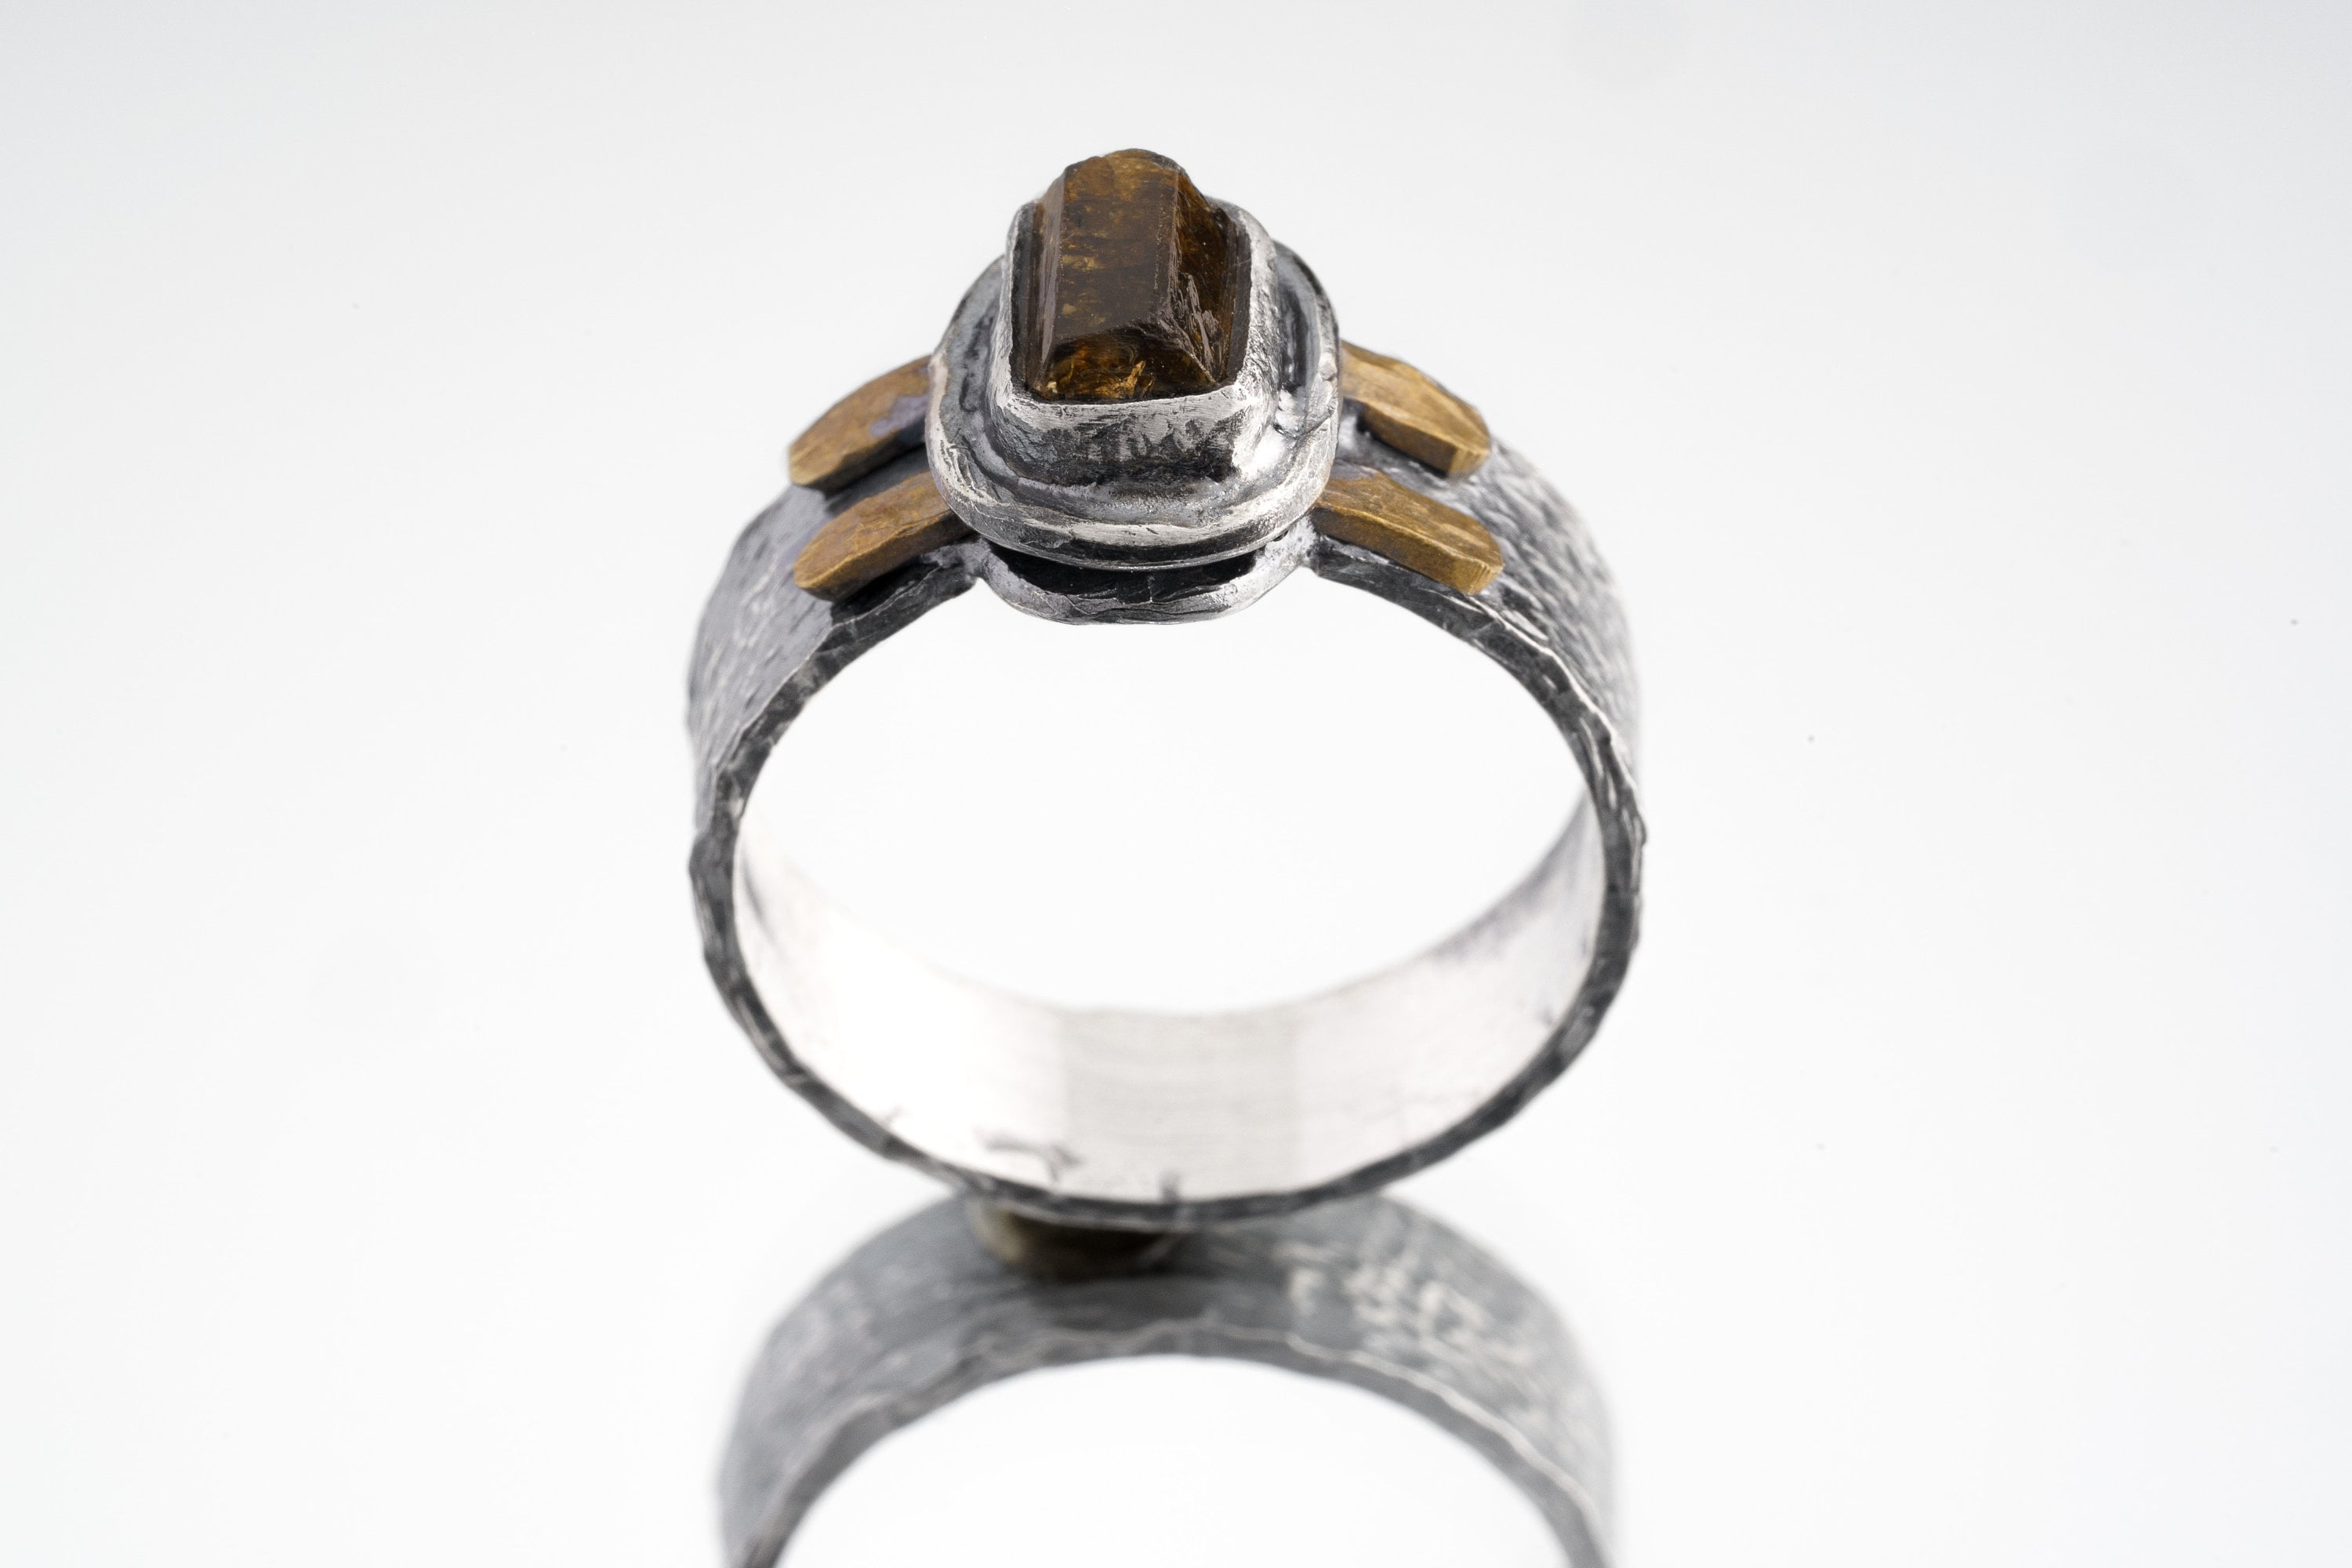 Raw Gem Dravite Brown Tourmaline - 925 Sterling Silver - Large Sized Heavy Set - Hammer Textured Silver & Brass CrystalRing